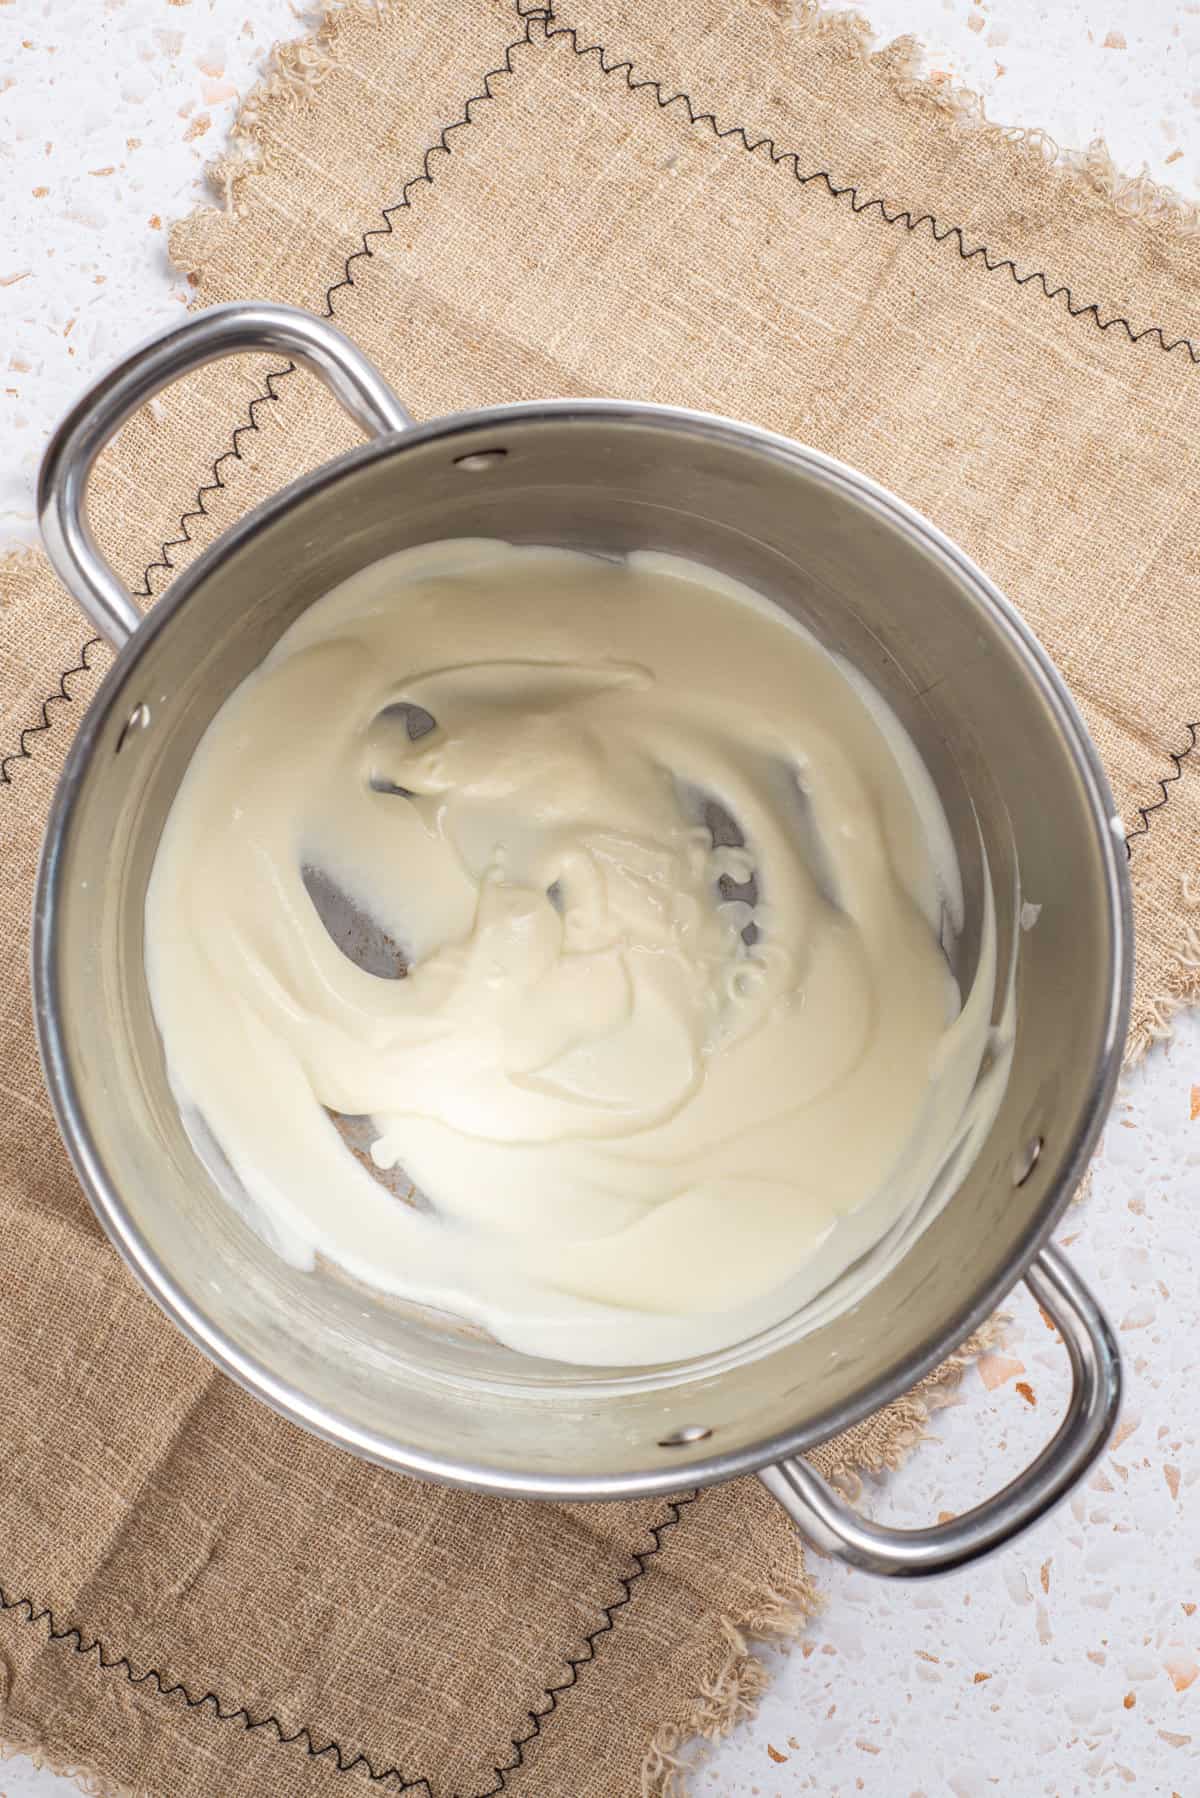 An image of melted cream cheese in a saucepan.